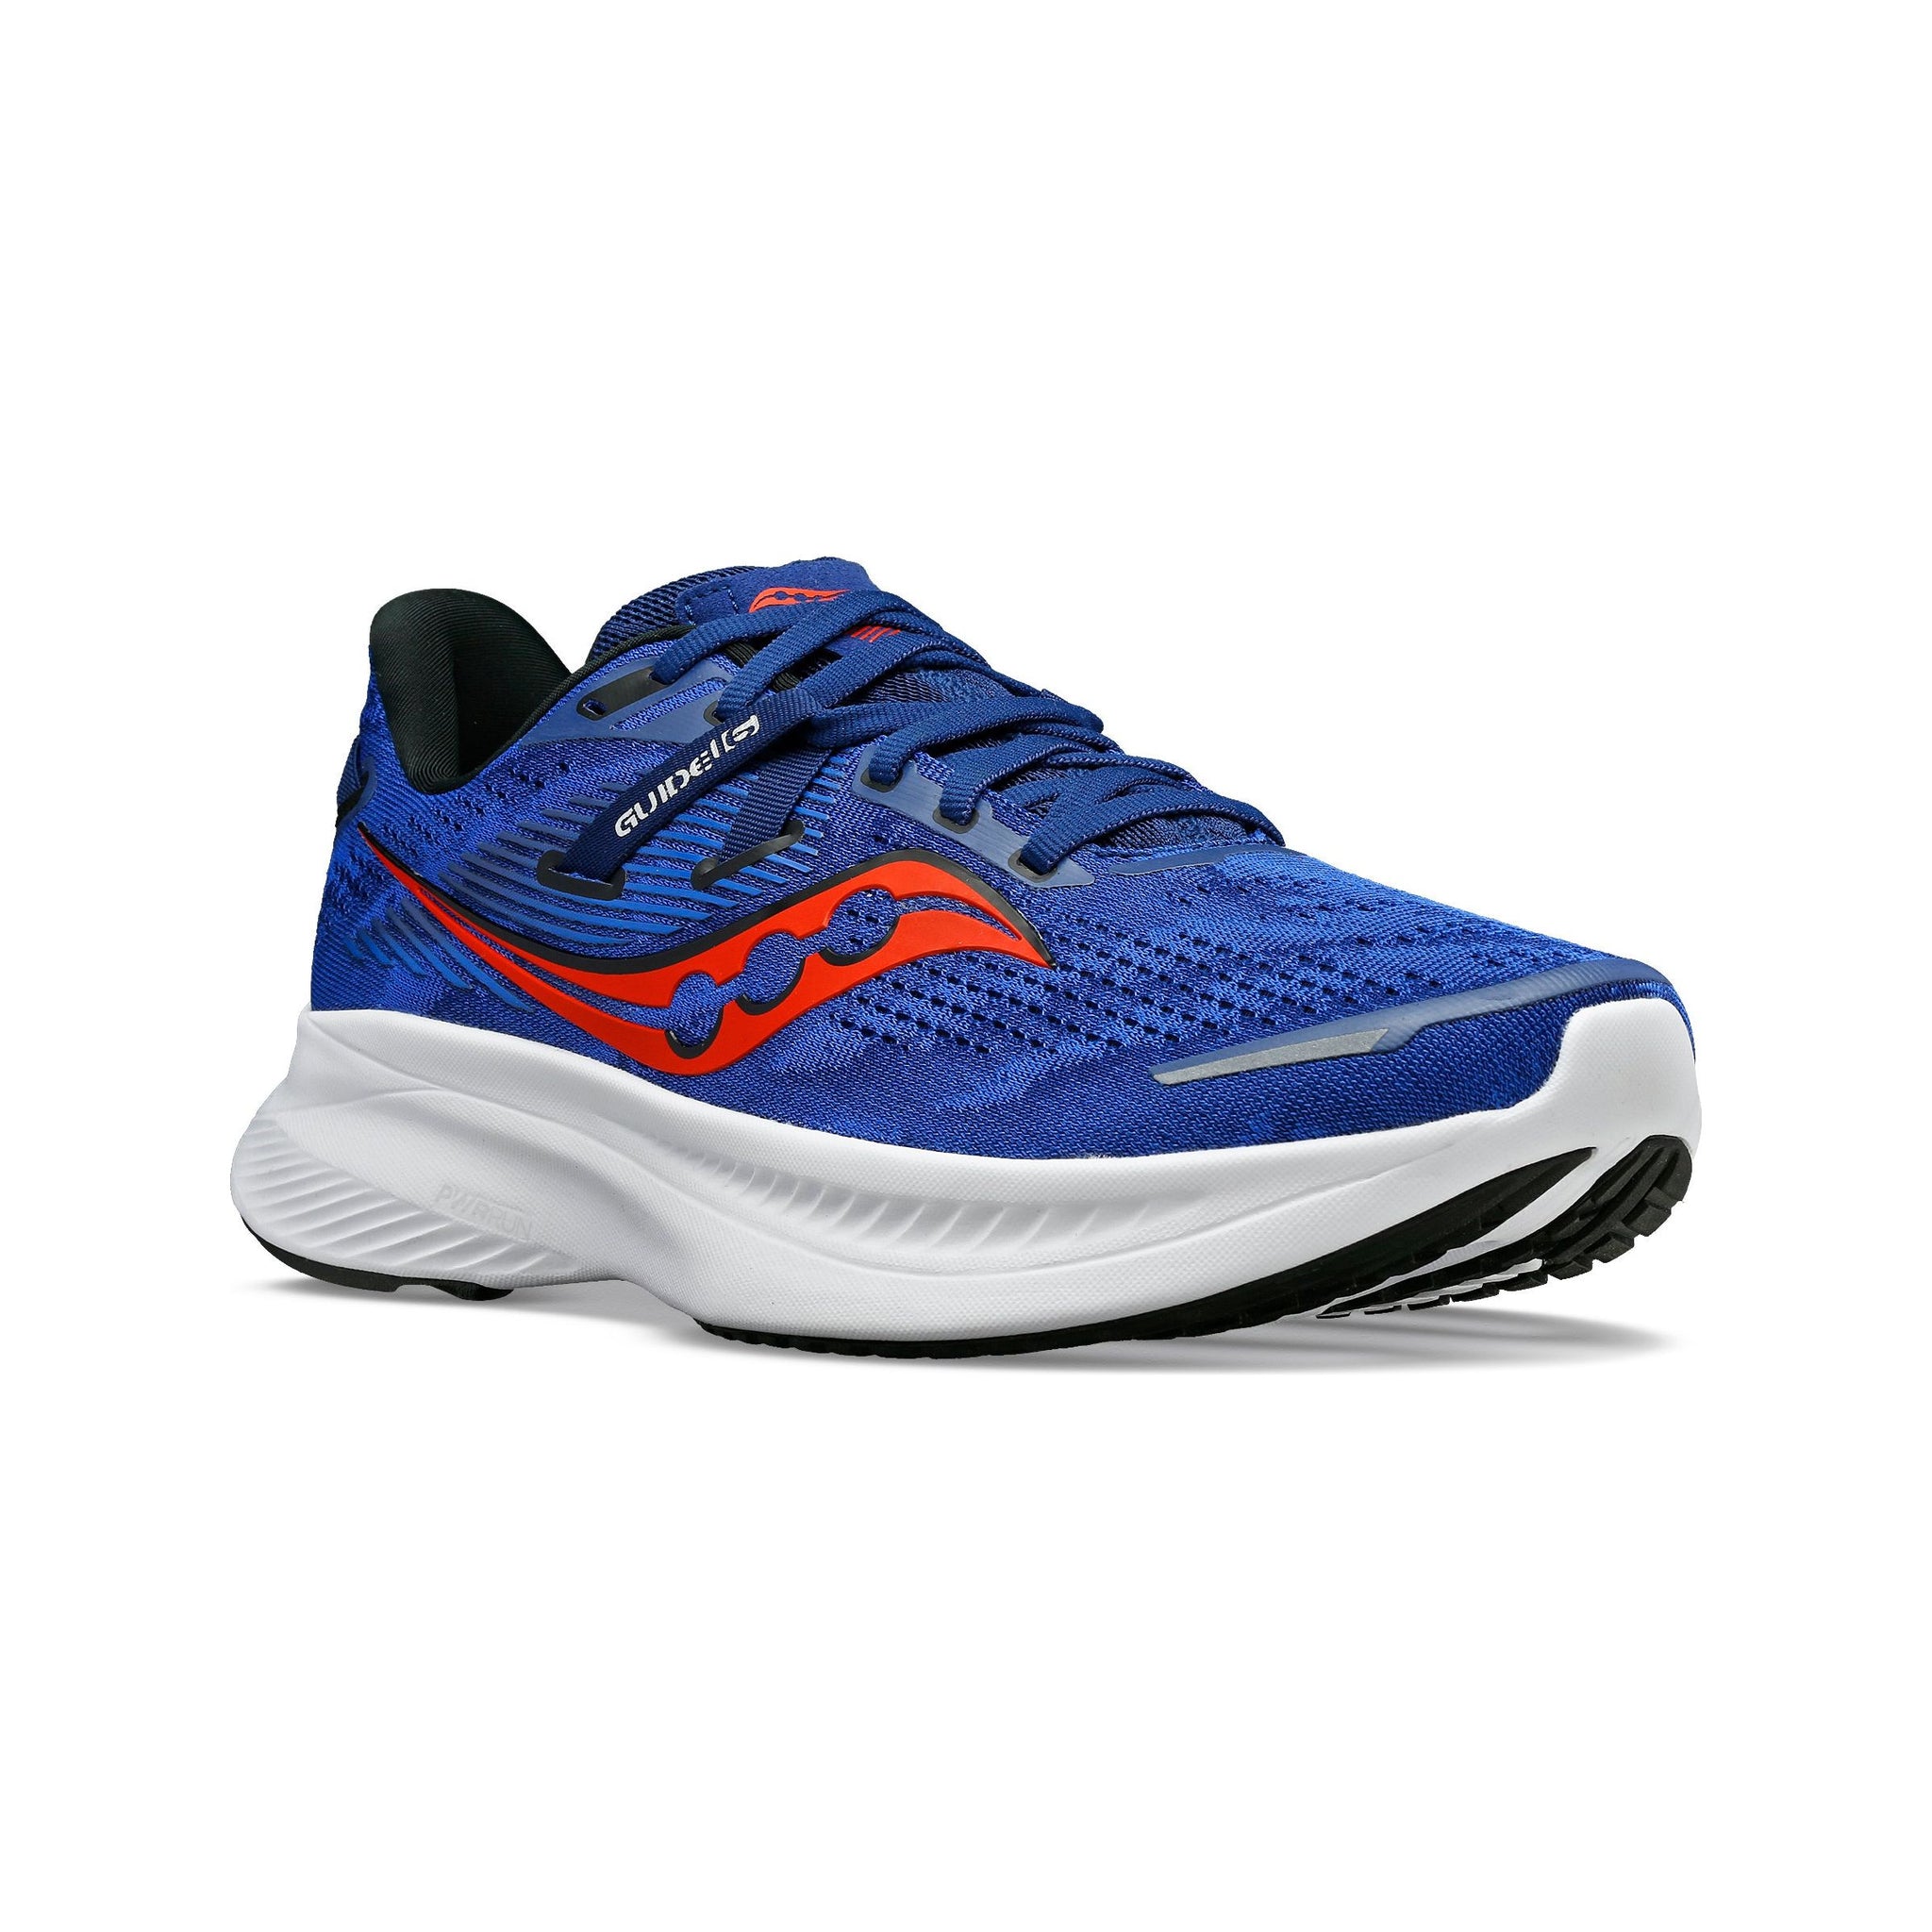 Saucony Guide 16 (S20810-35) - Mens Stability Trainer in Indigo/Black |Saucony Trainers | Wisemans | Bantry | Shoe Shop | West Cork | Ireland